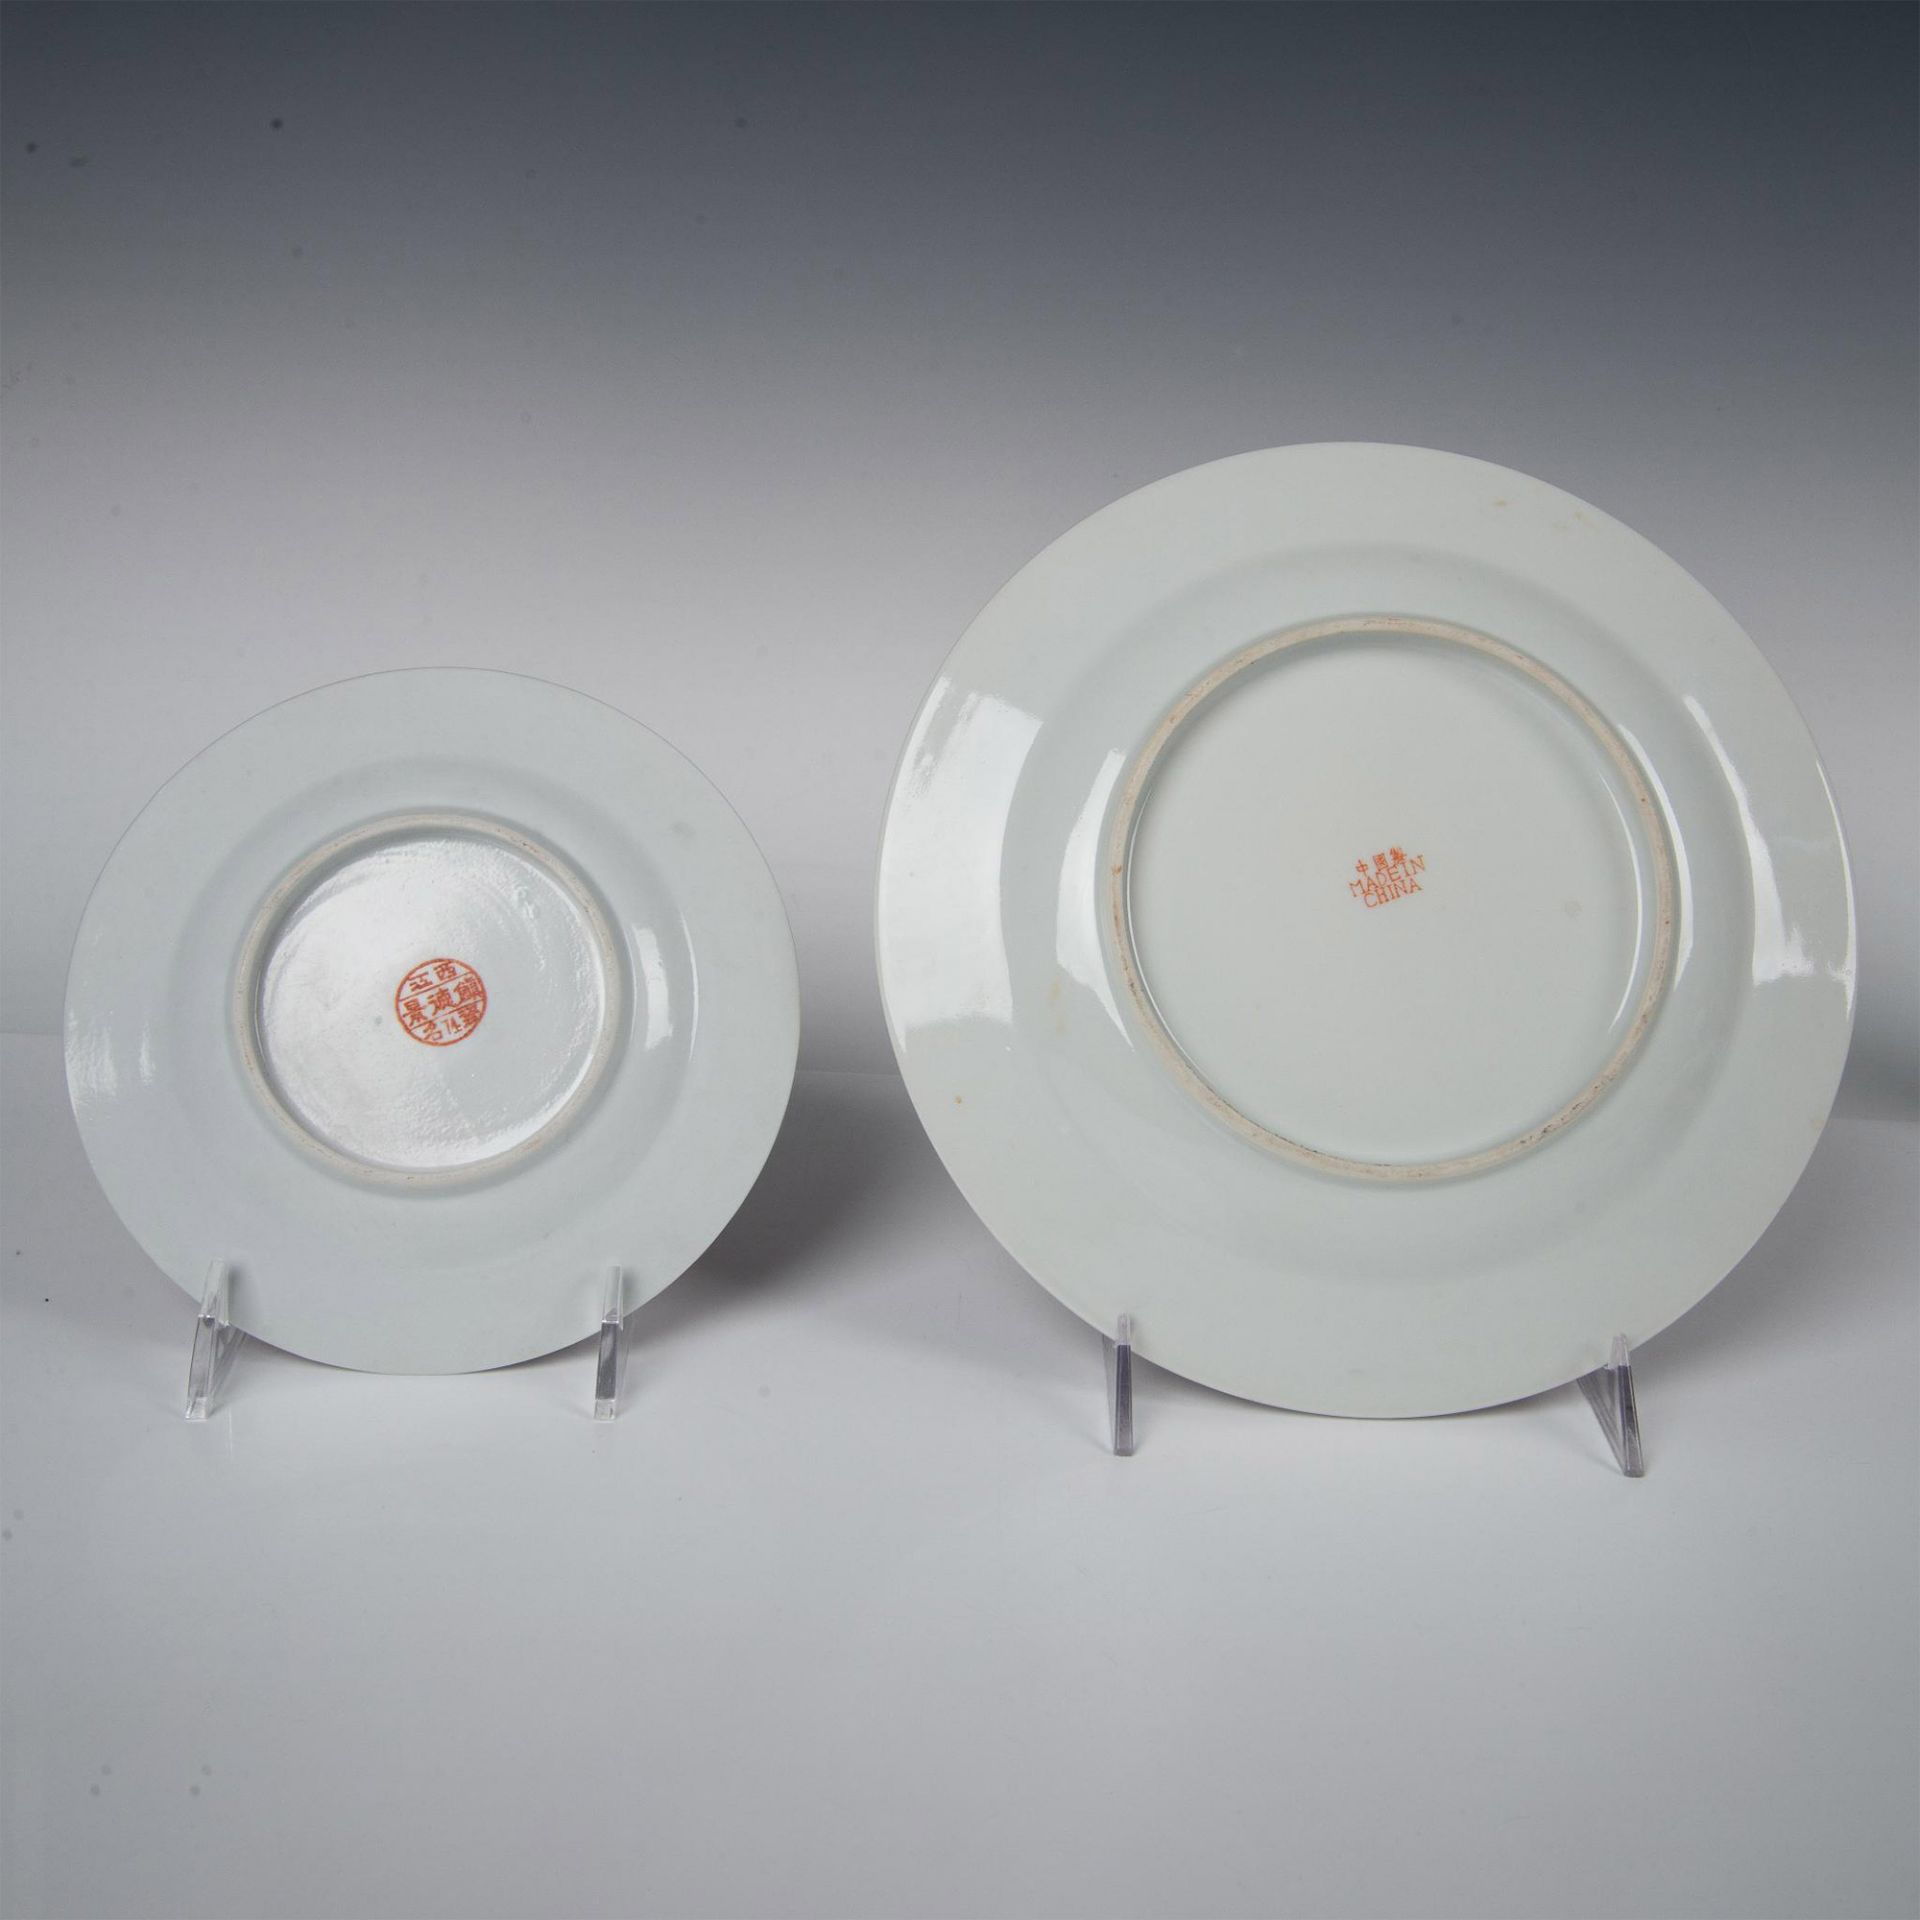 8pc Chinese Porcelain Serving Set - Image 3 of 9